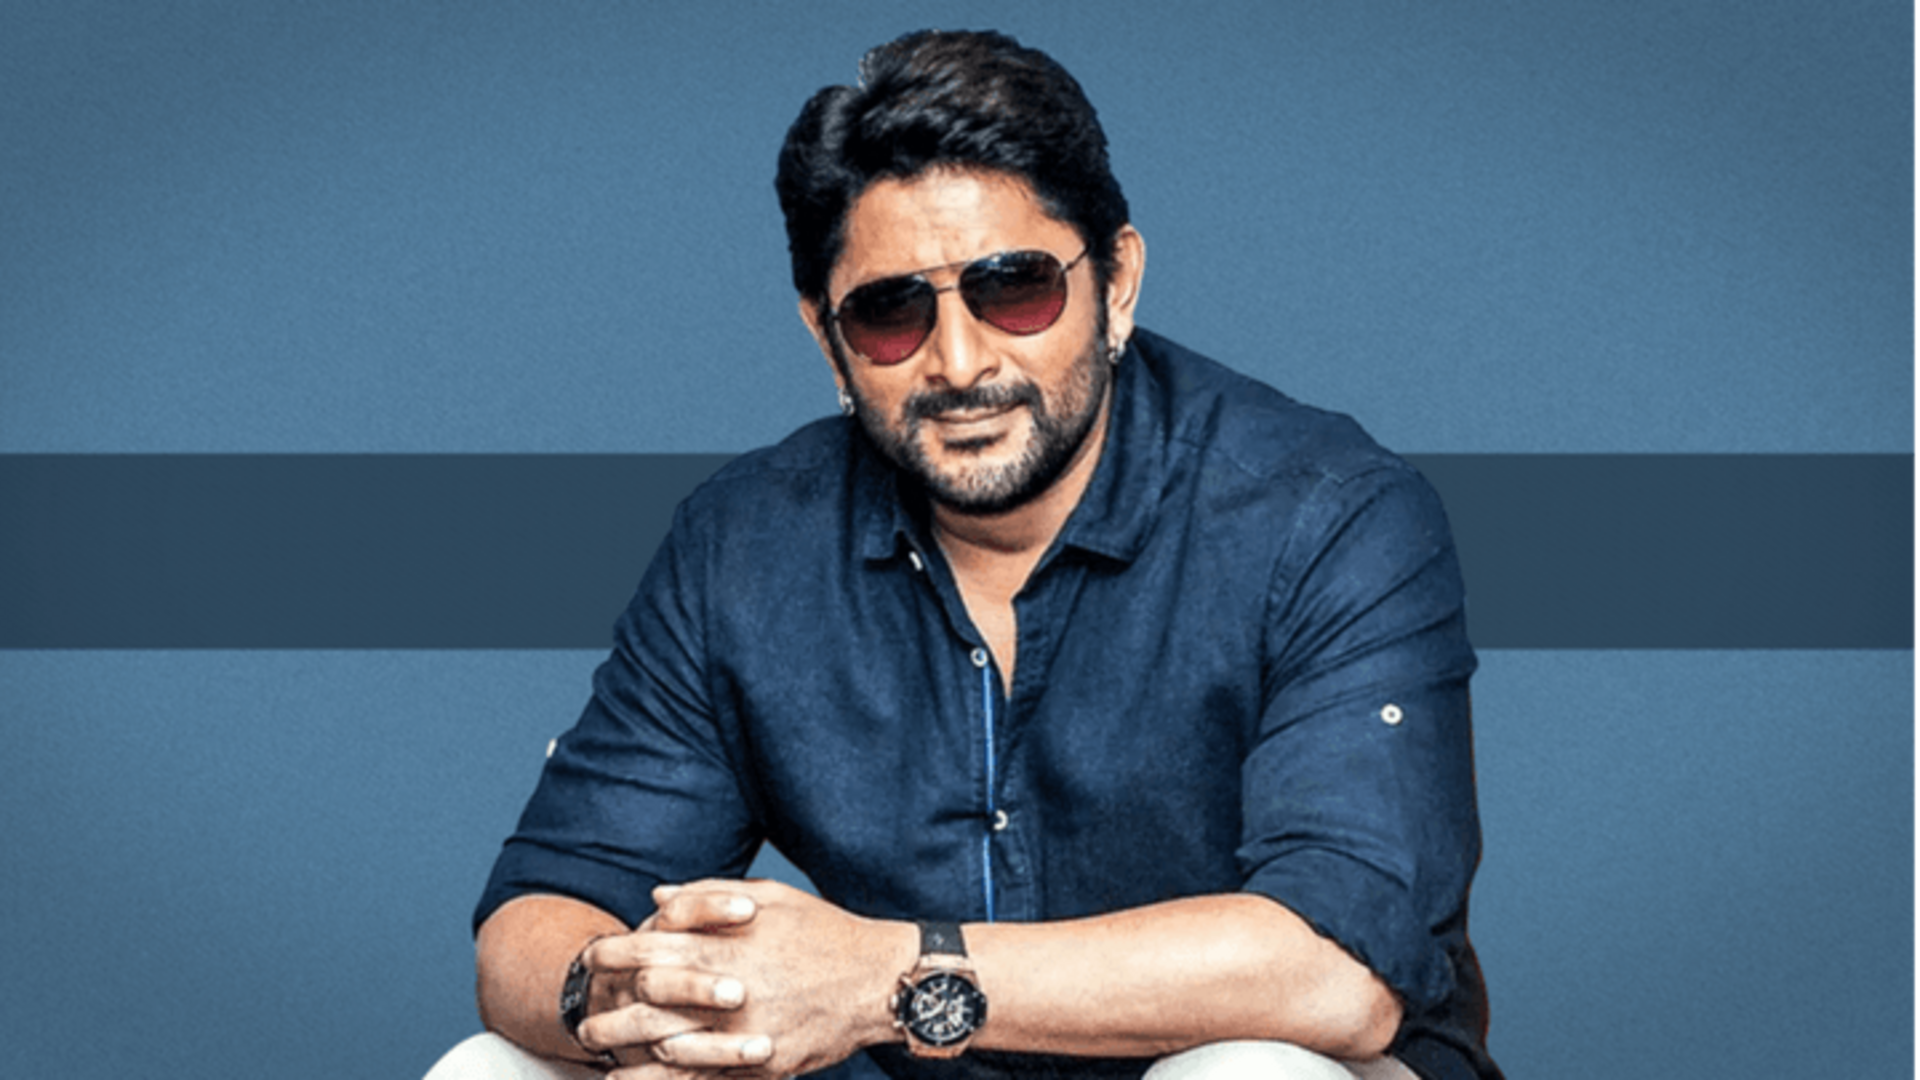 Age-appropriate roles, being replaced: Highlights from Arshad Warsi's recent interview